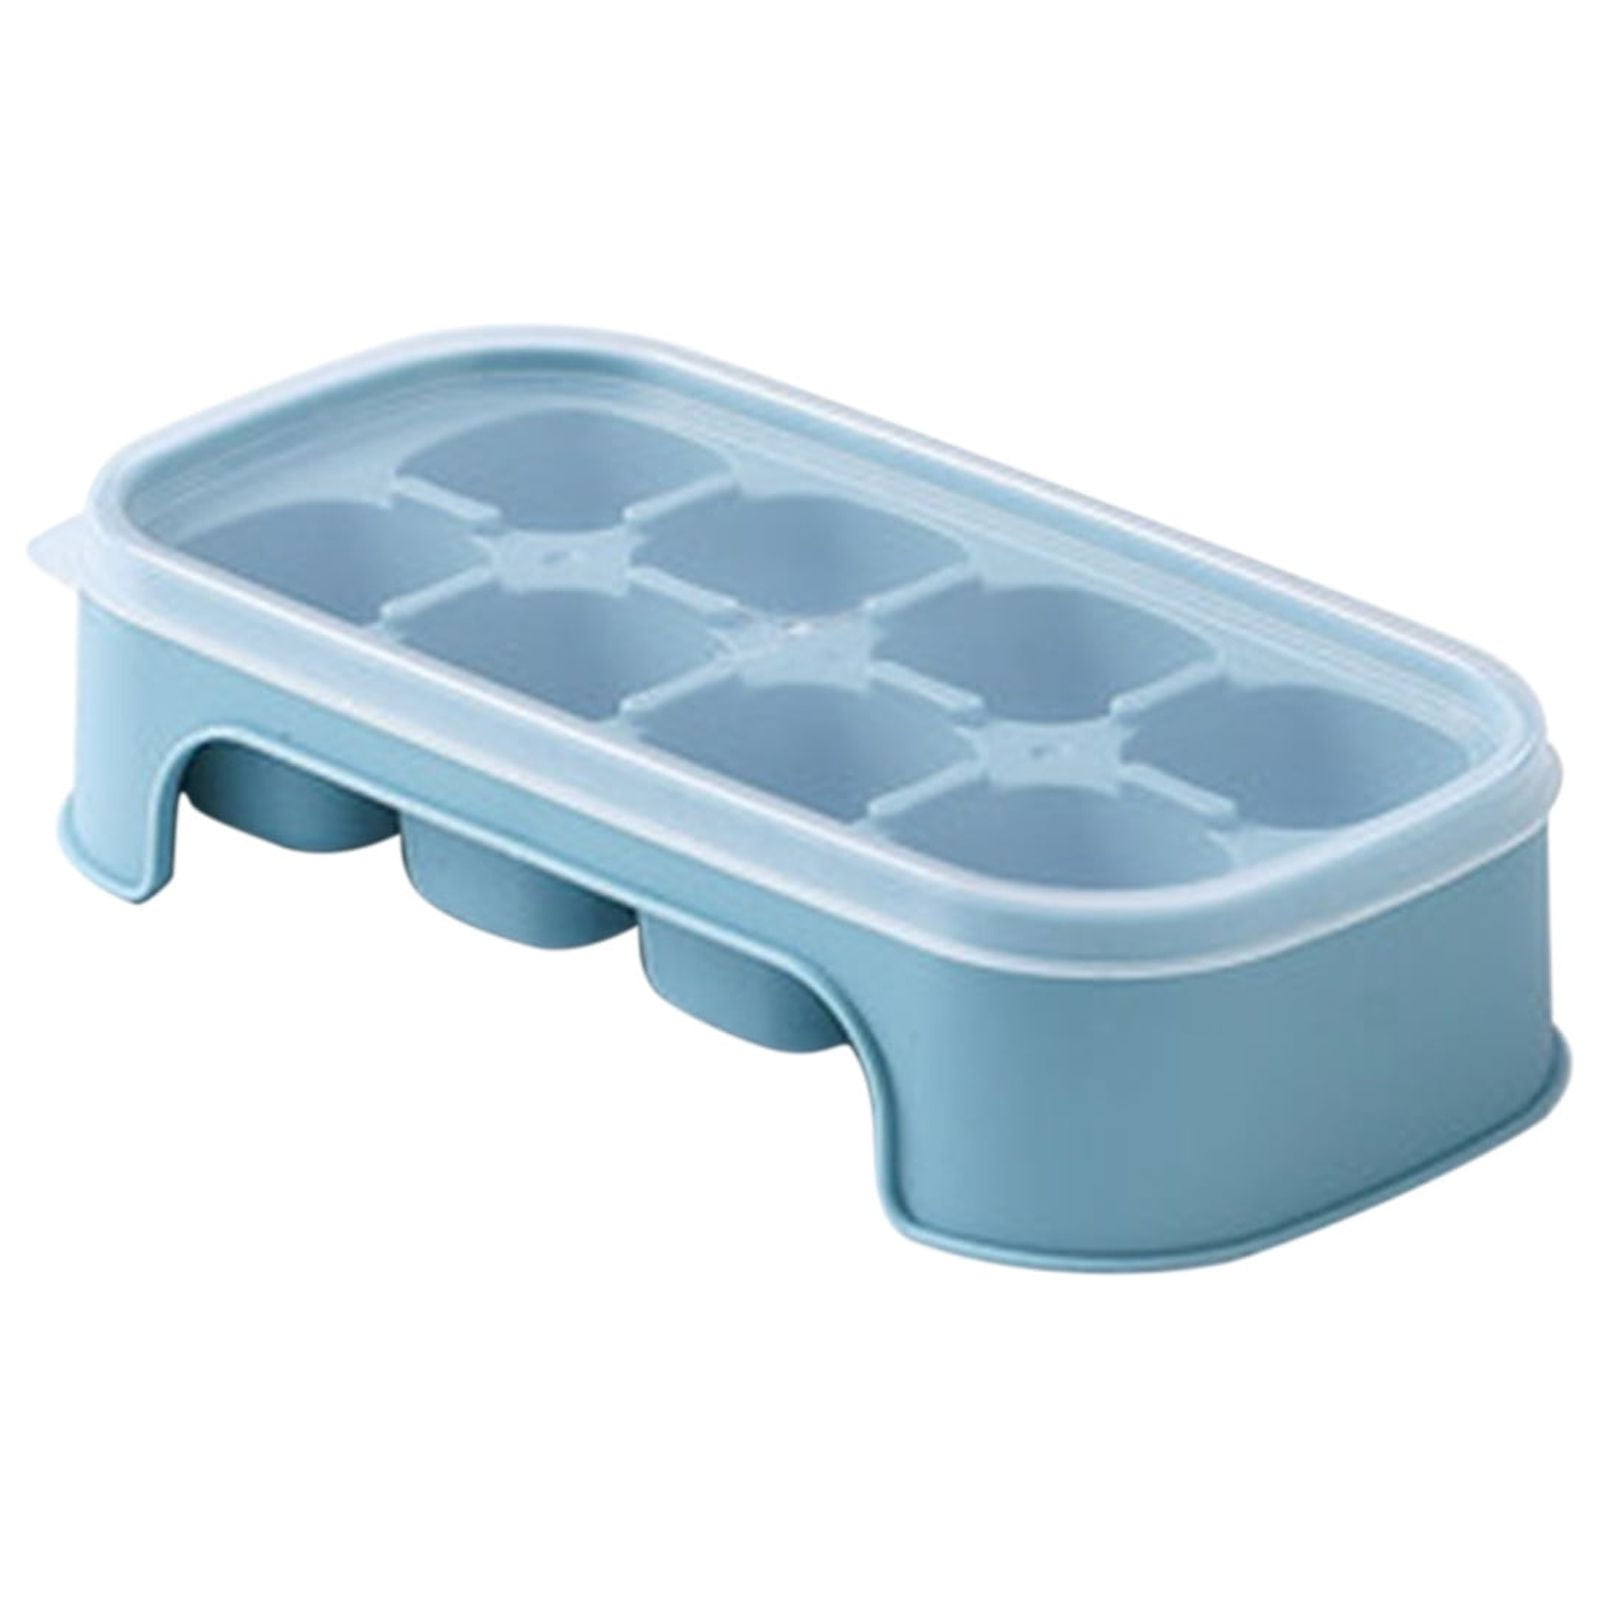 Sdjma One Touch Release Ice Cube Tray with Lid for Freezer, 64 Grids Silicone Ice Tray with Storage Bin, Easy Release Ice Cube Molds for Cocktail